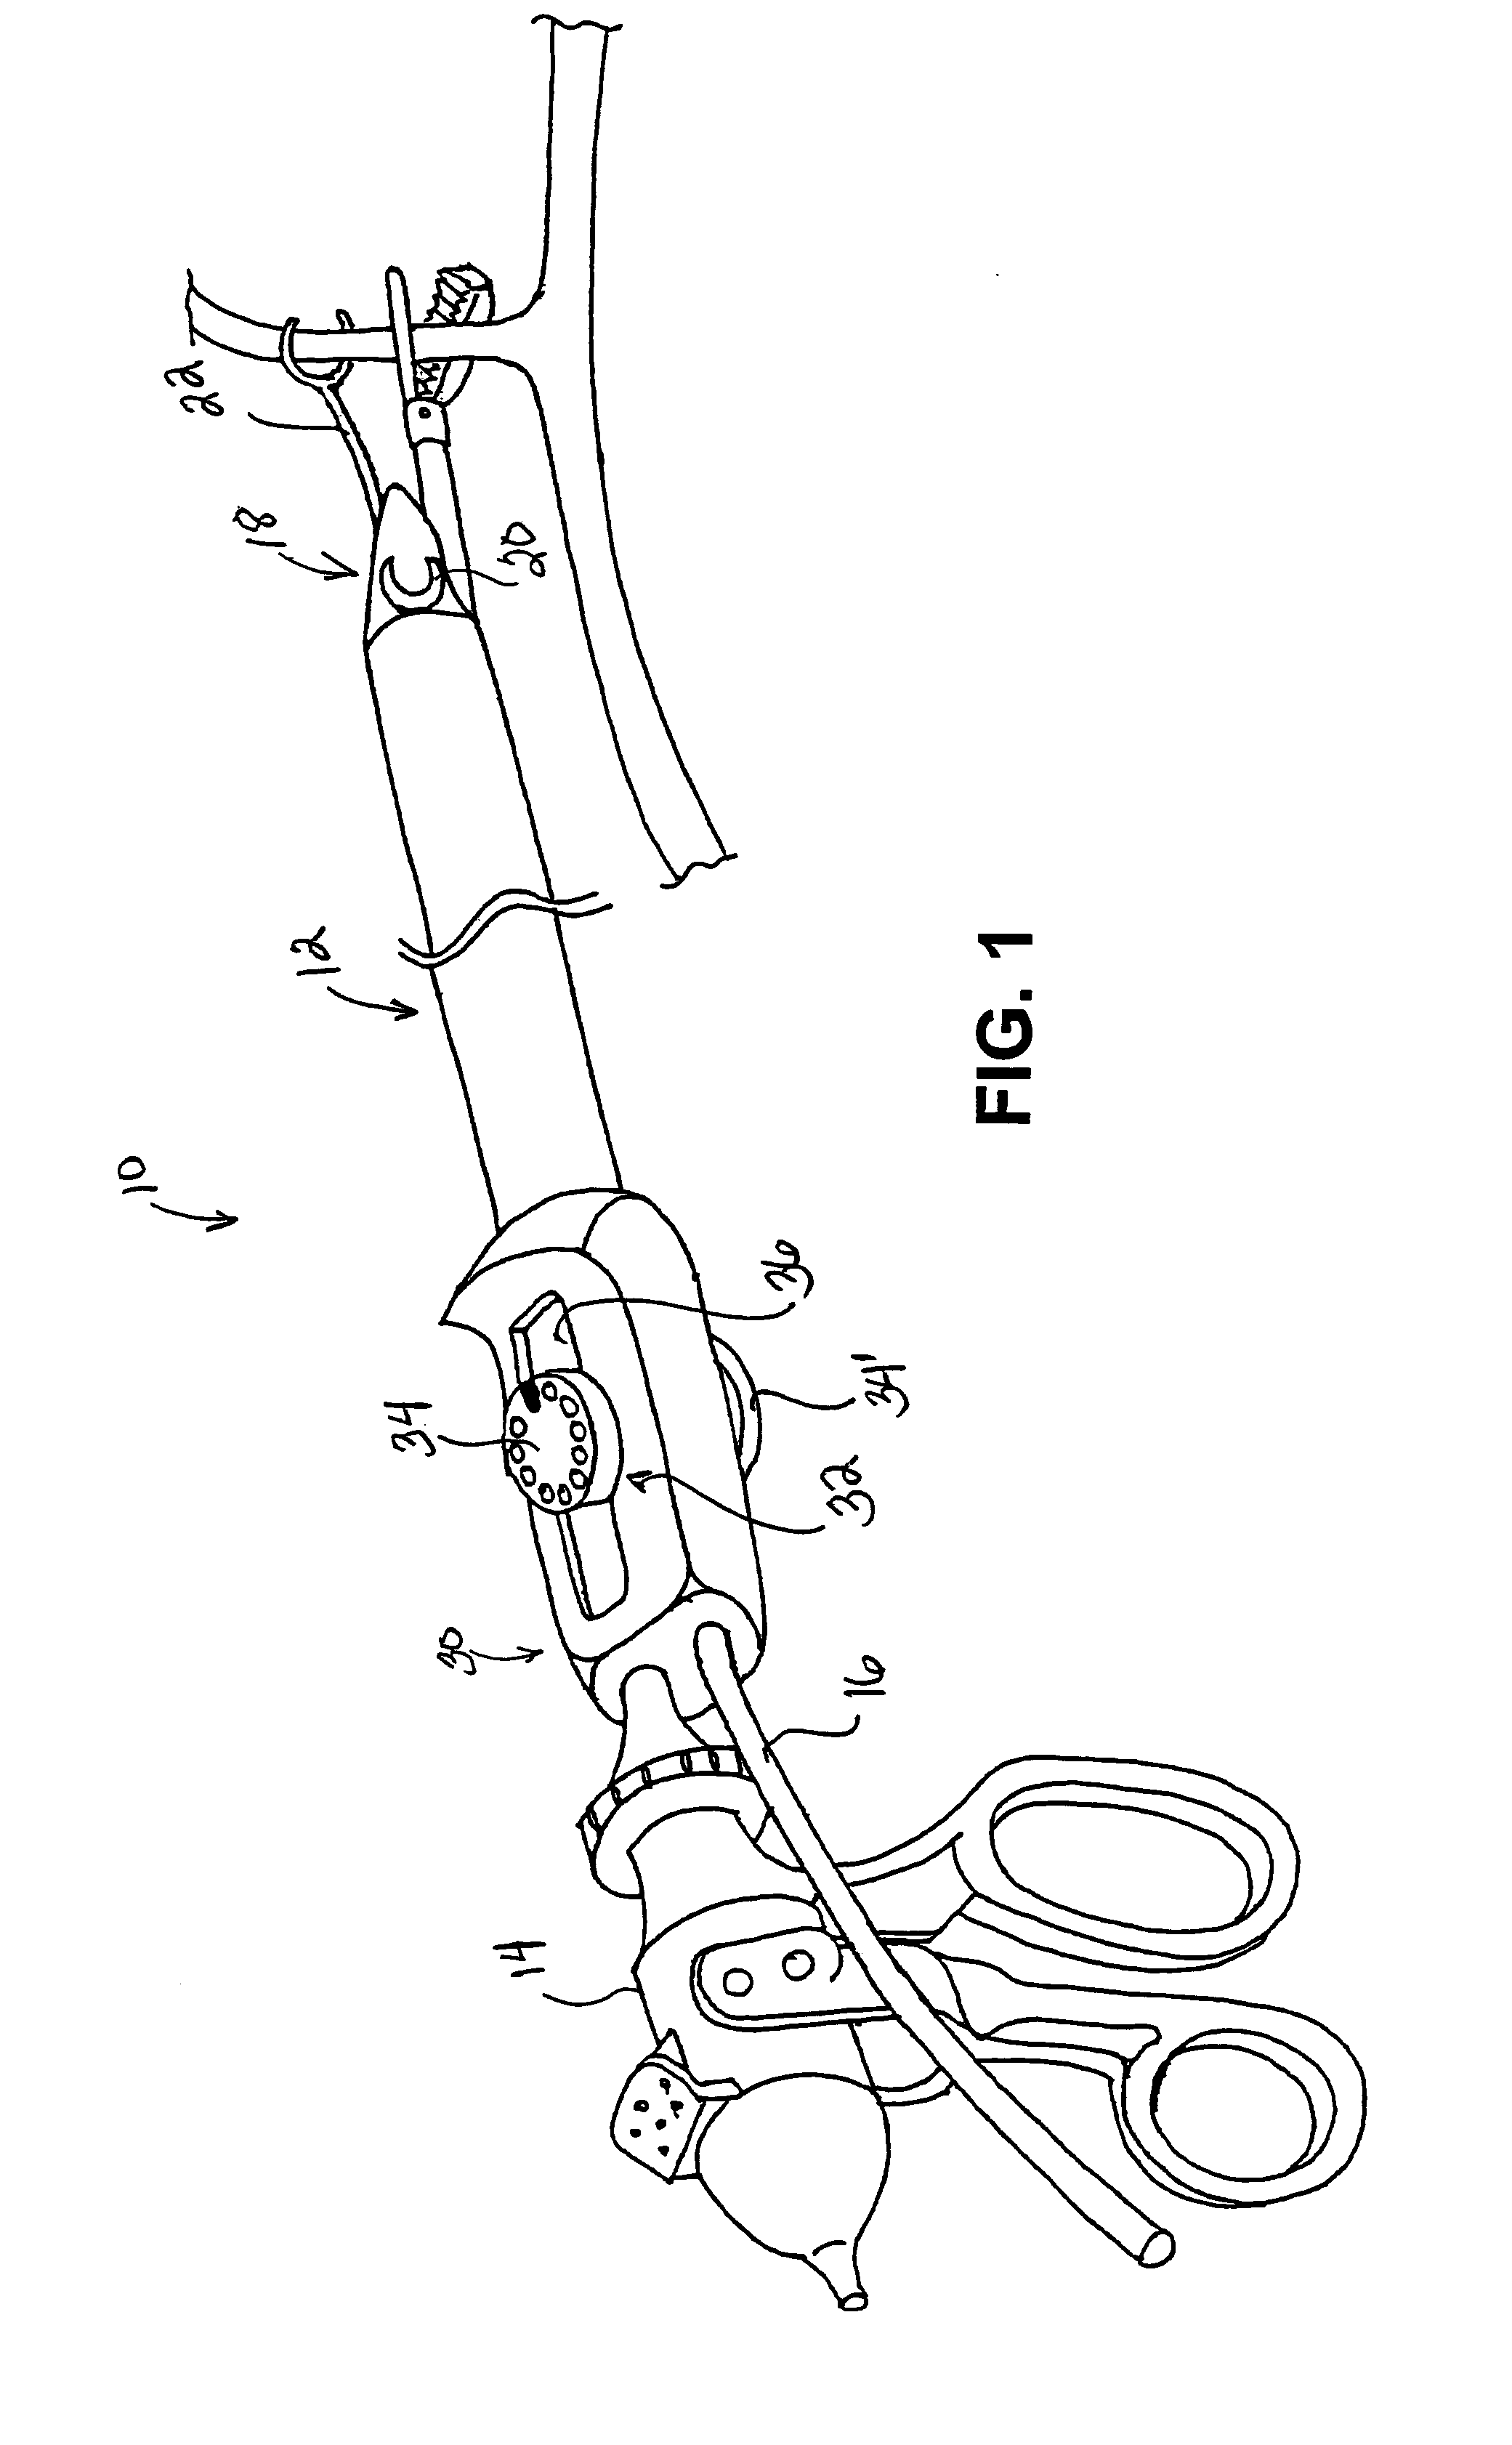 Vein dissector, cauterizing and ligating apparatus for endoscopic harvesting of blood vessels